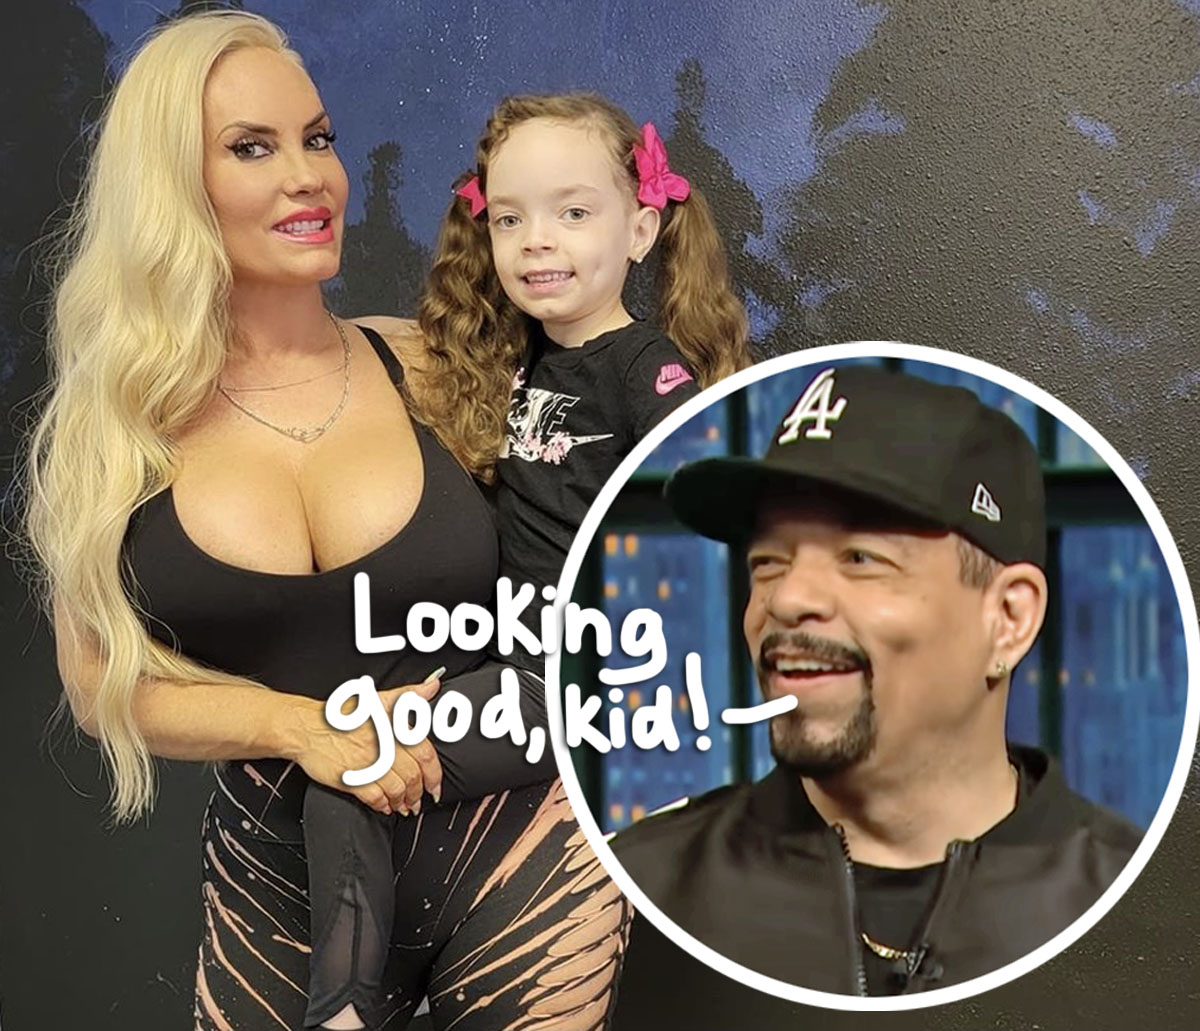 Money Wise Marketcoco Austin And Daughter Chanel Wear Matching Bikinis See The Coco Chanel